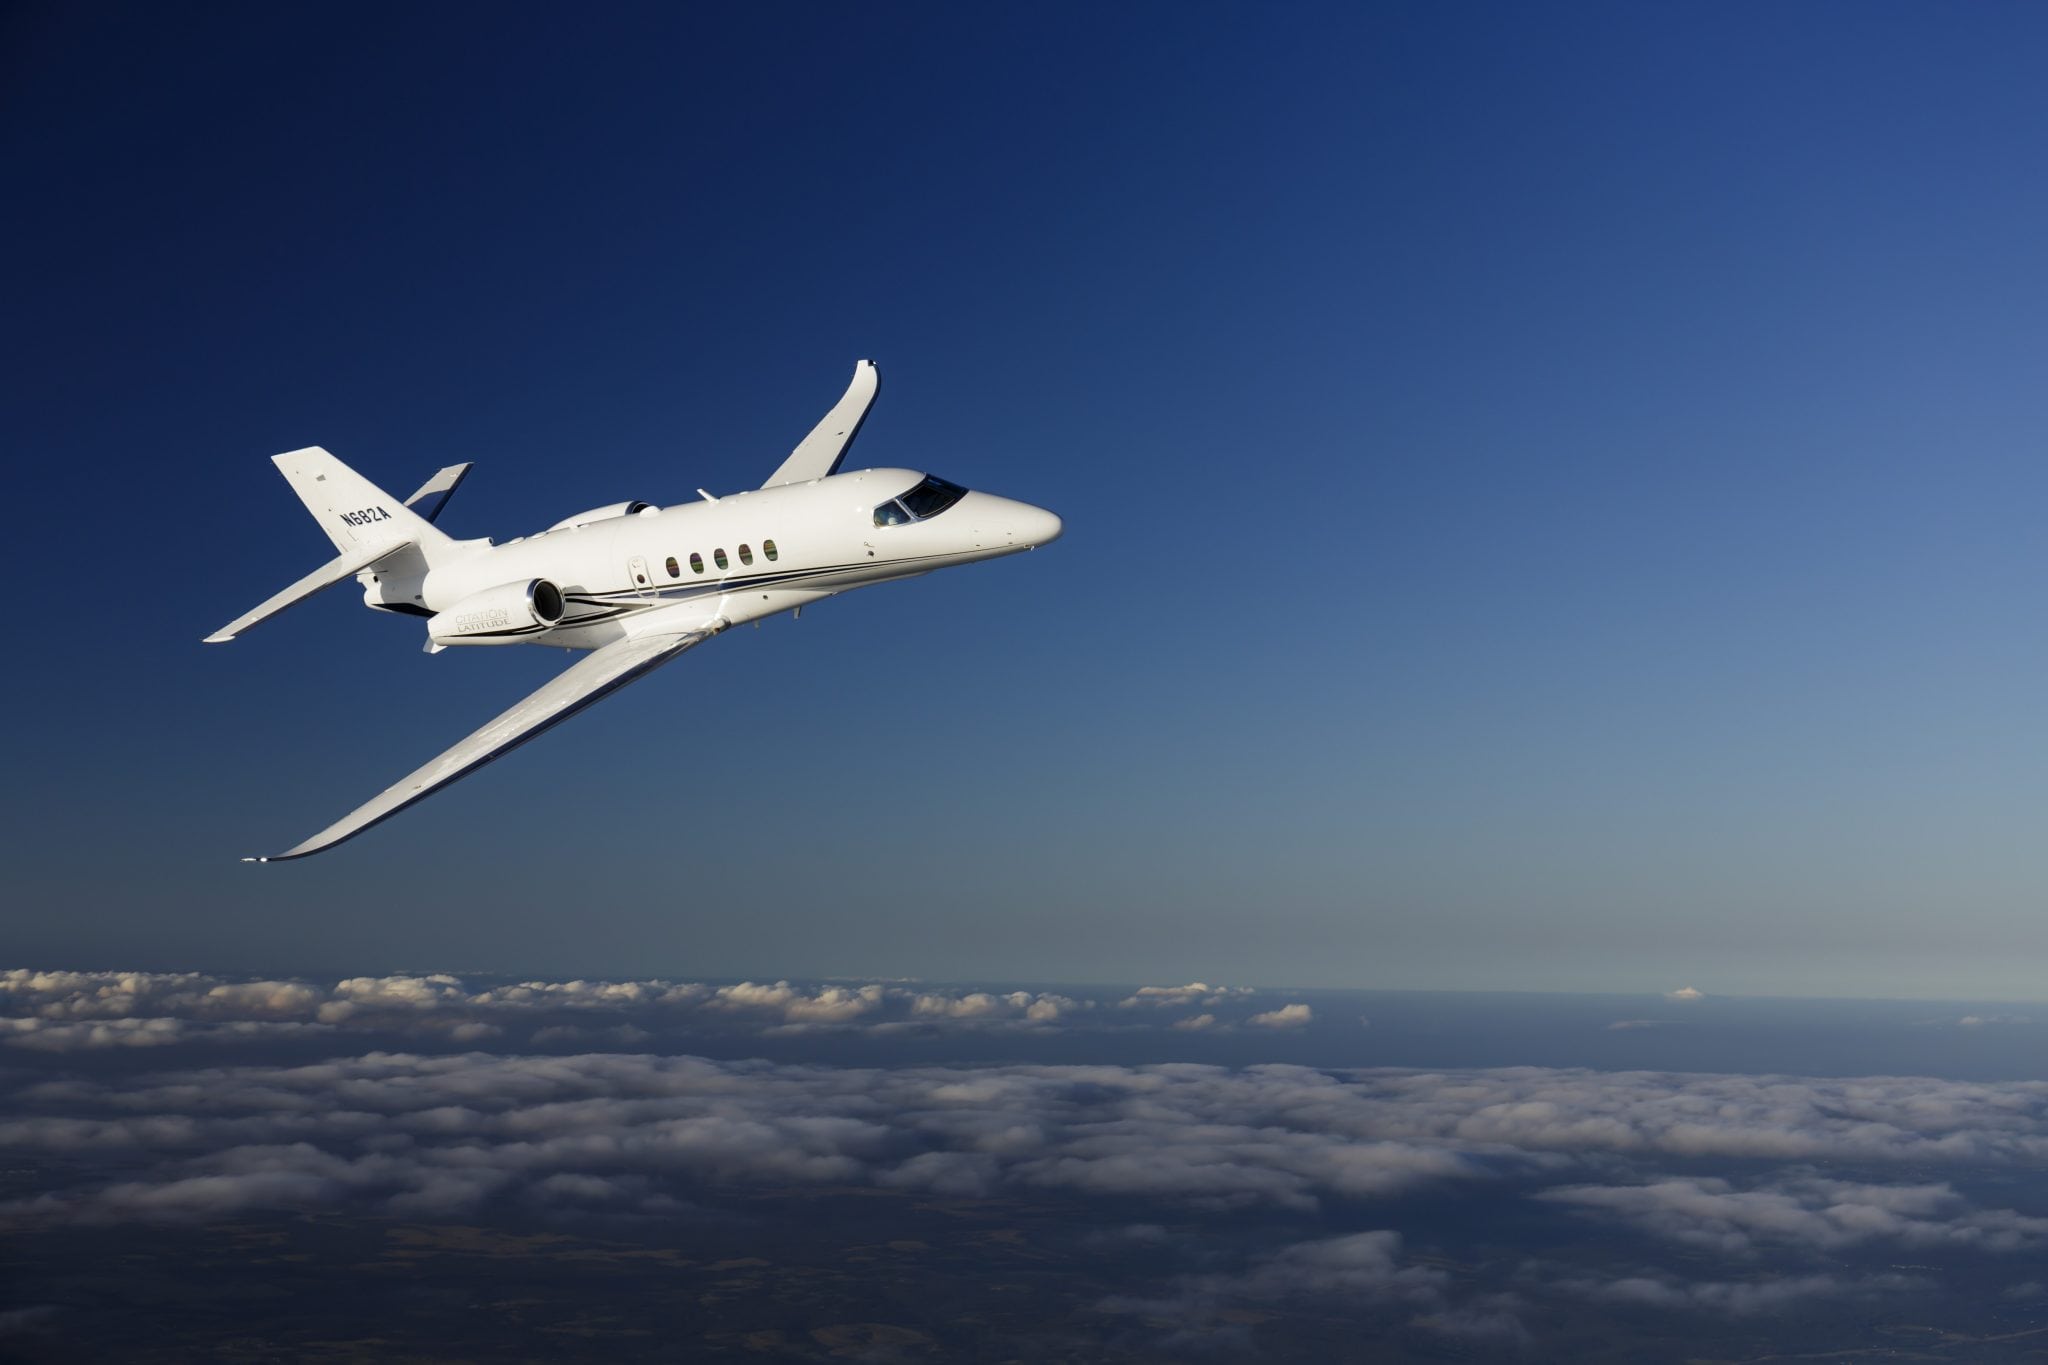 Cessna’s Citation Latitude, Textron Aviation delivered 33 in the first quarter